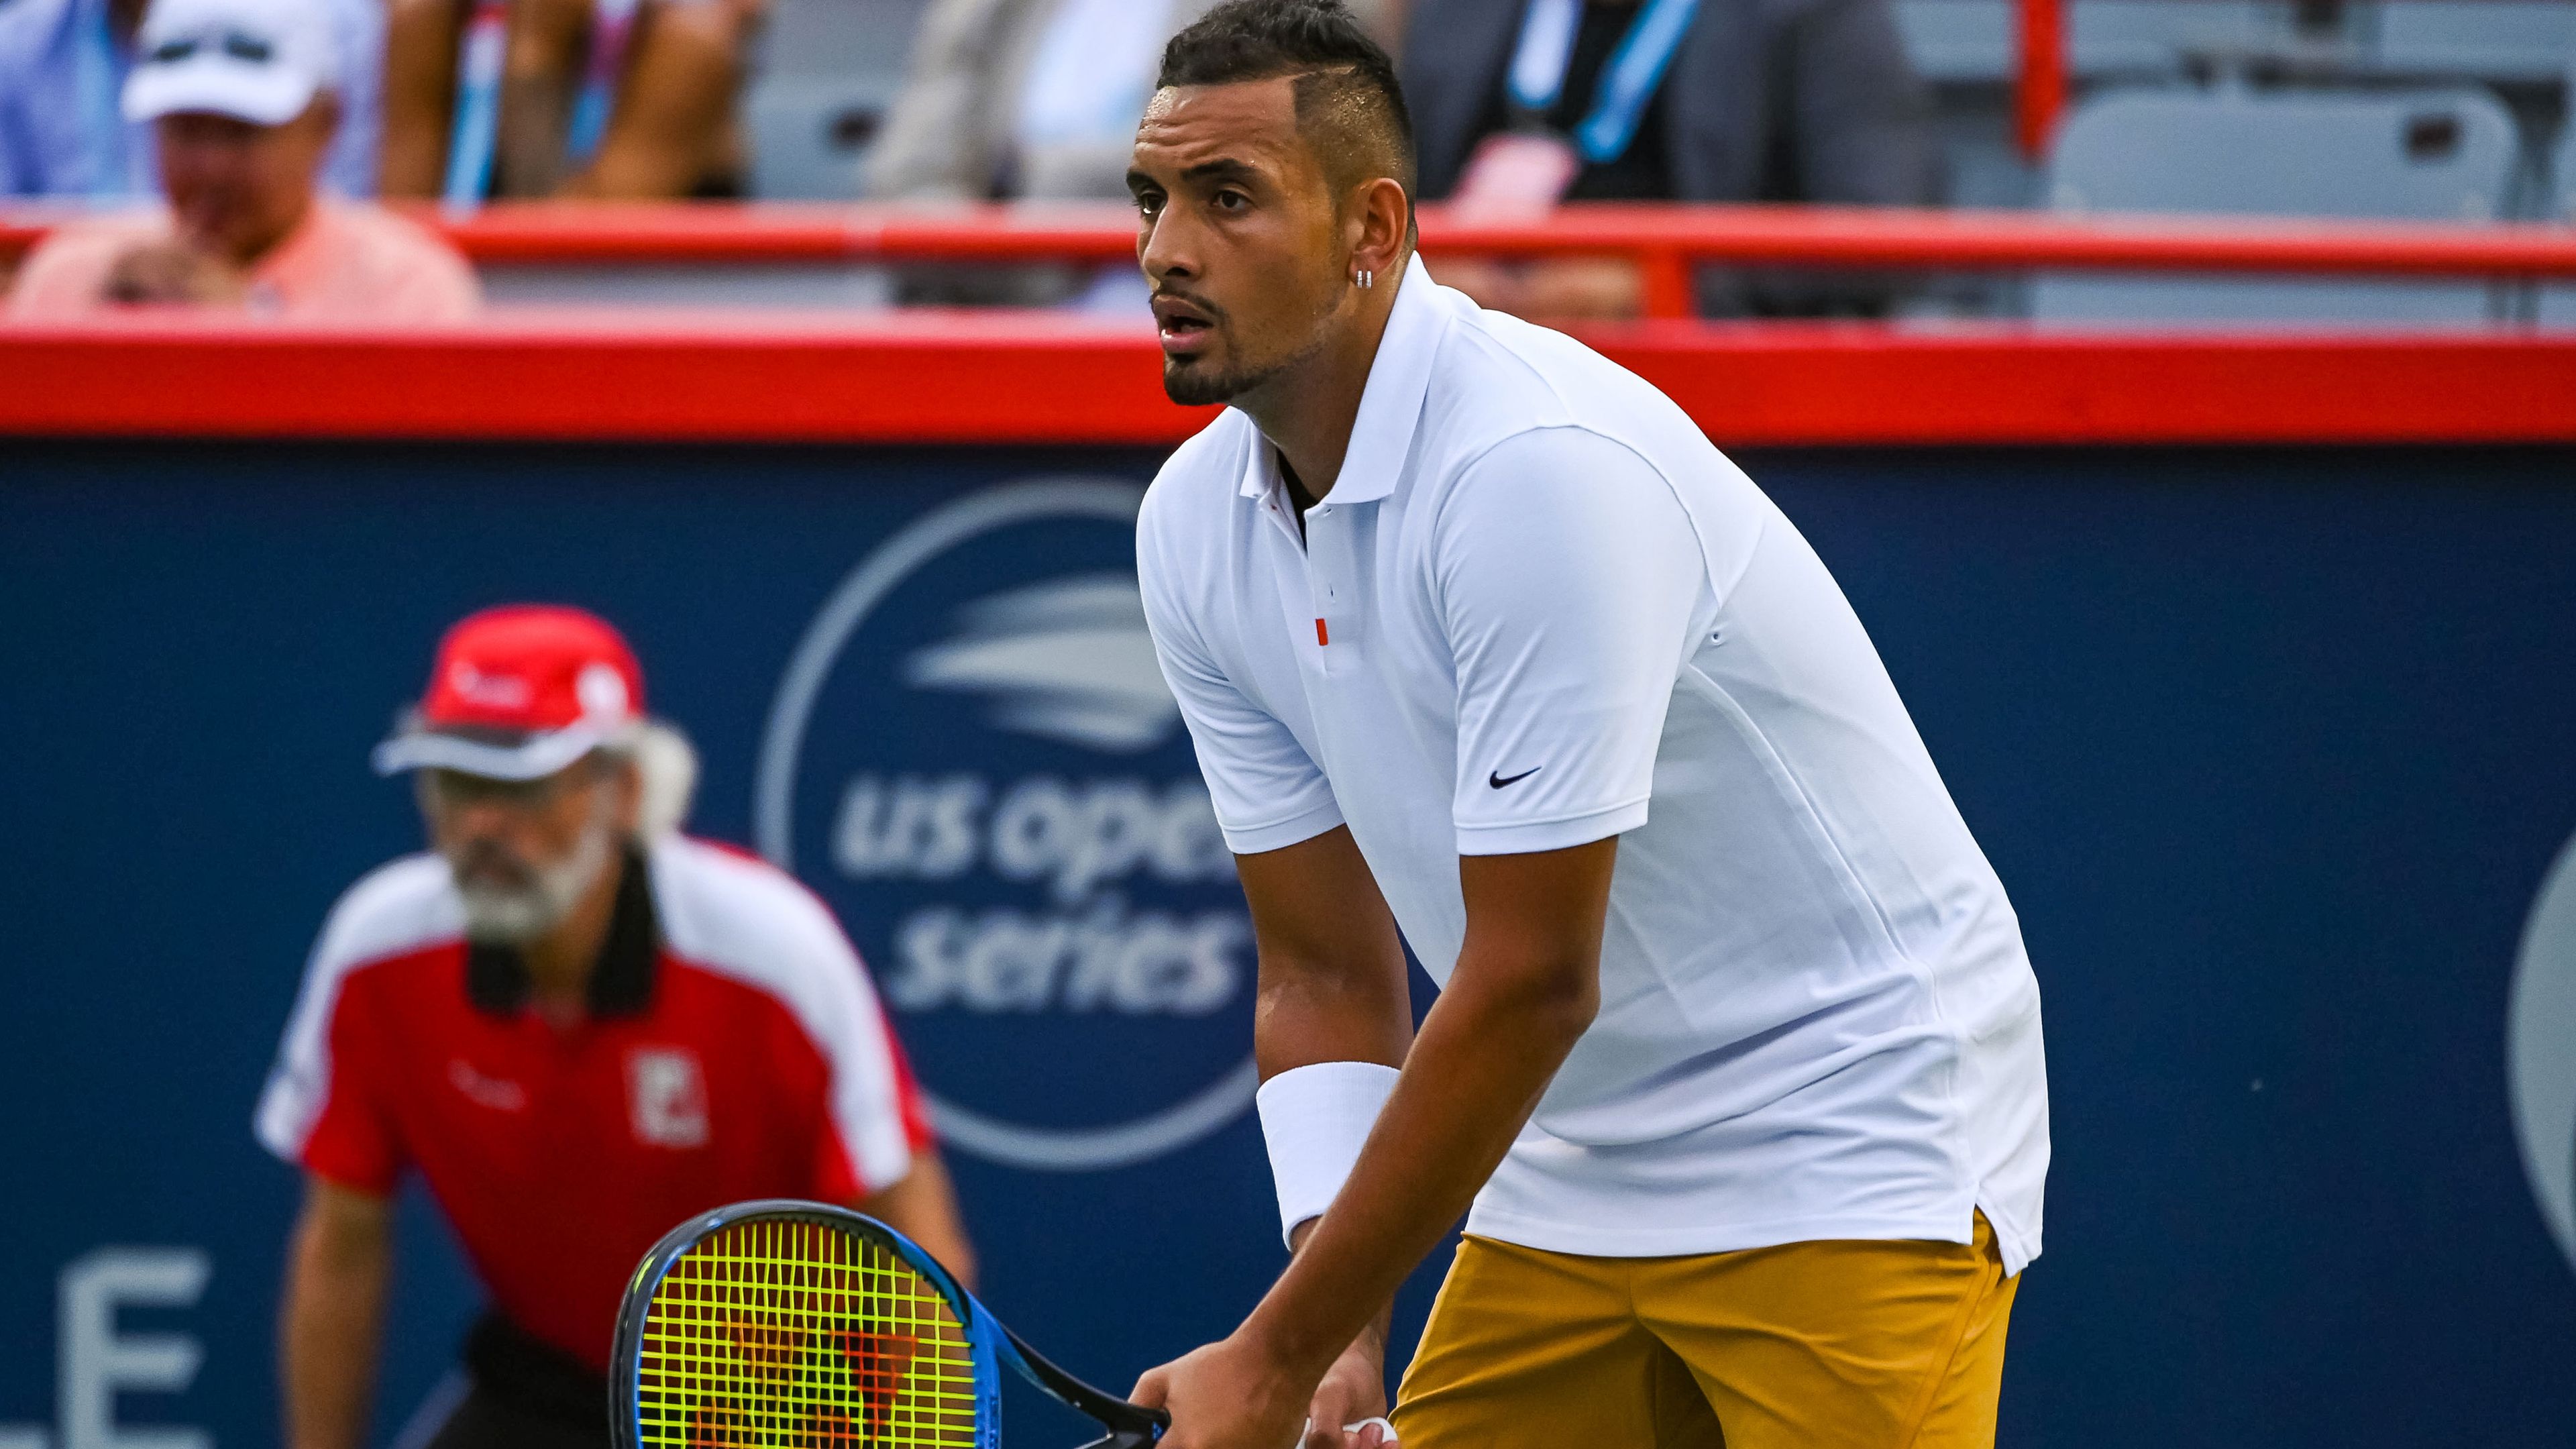 The problem tennis faces after ugly Nick Kyrgios outburst